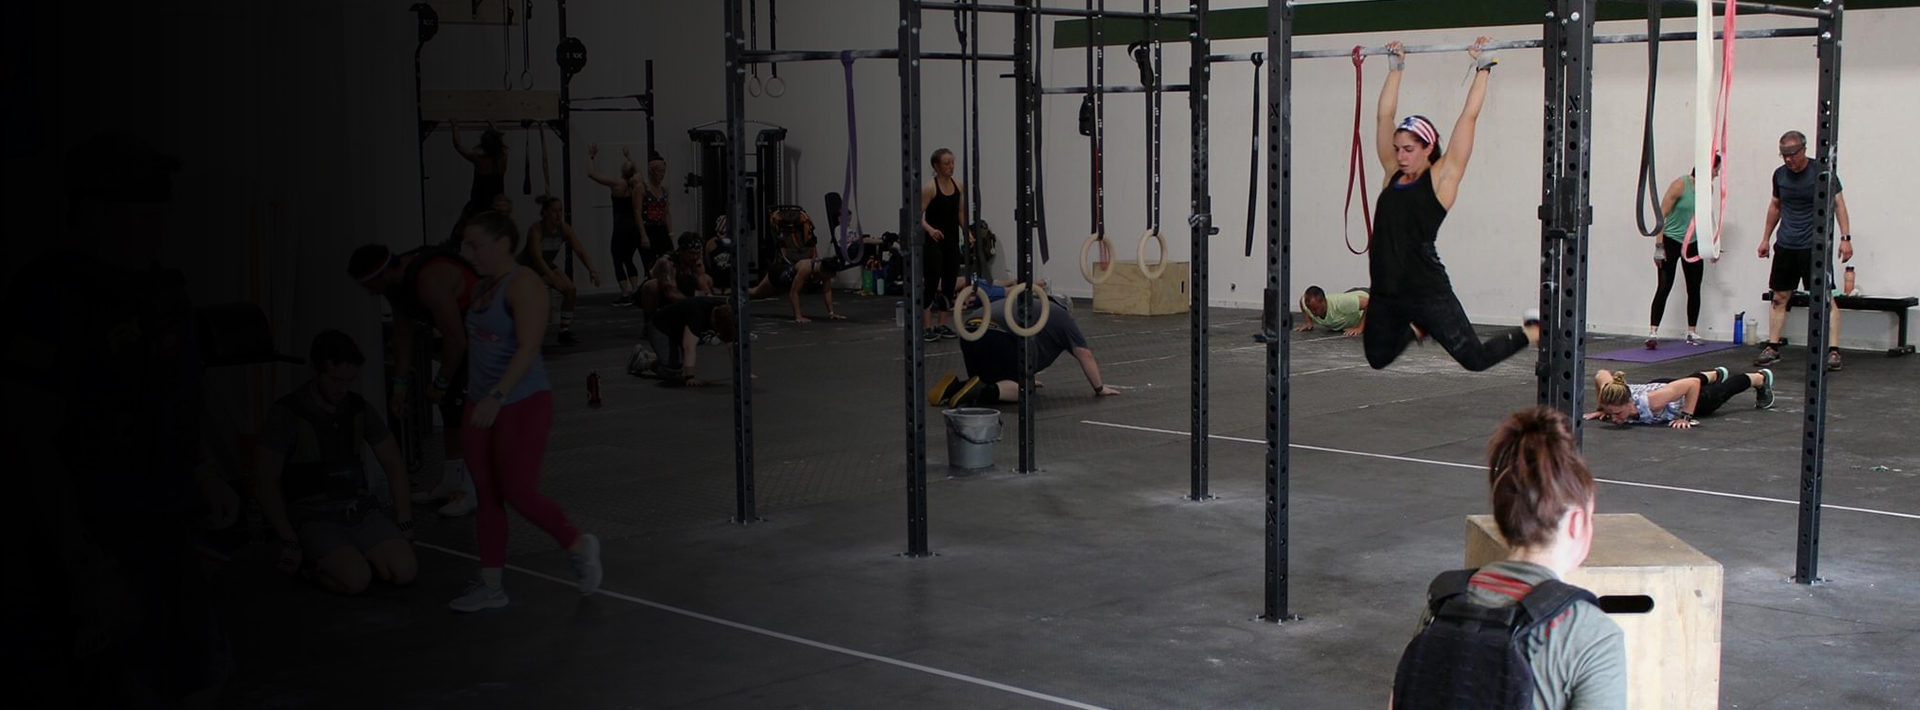 Rep Eaters CrossFit offers Personal Fitness Training Services to clients across Commerce Township, Michigan